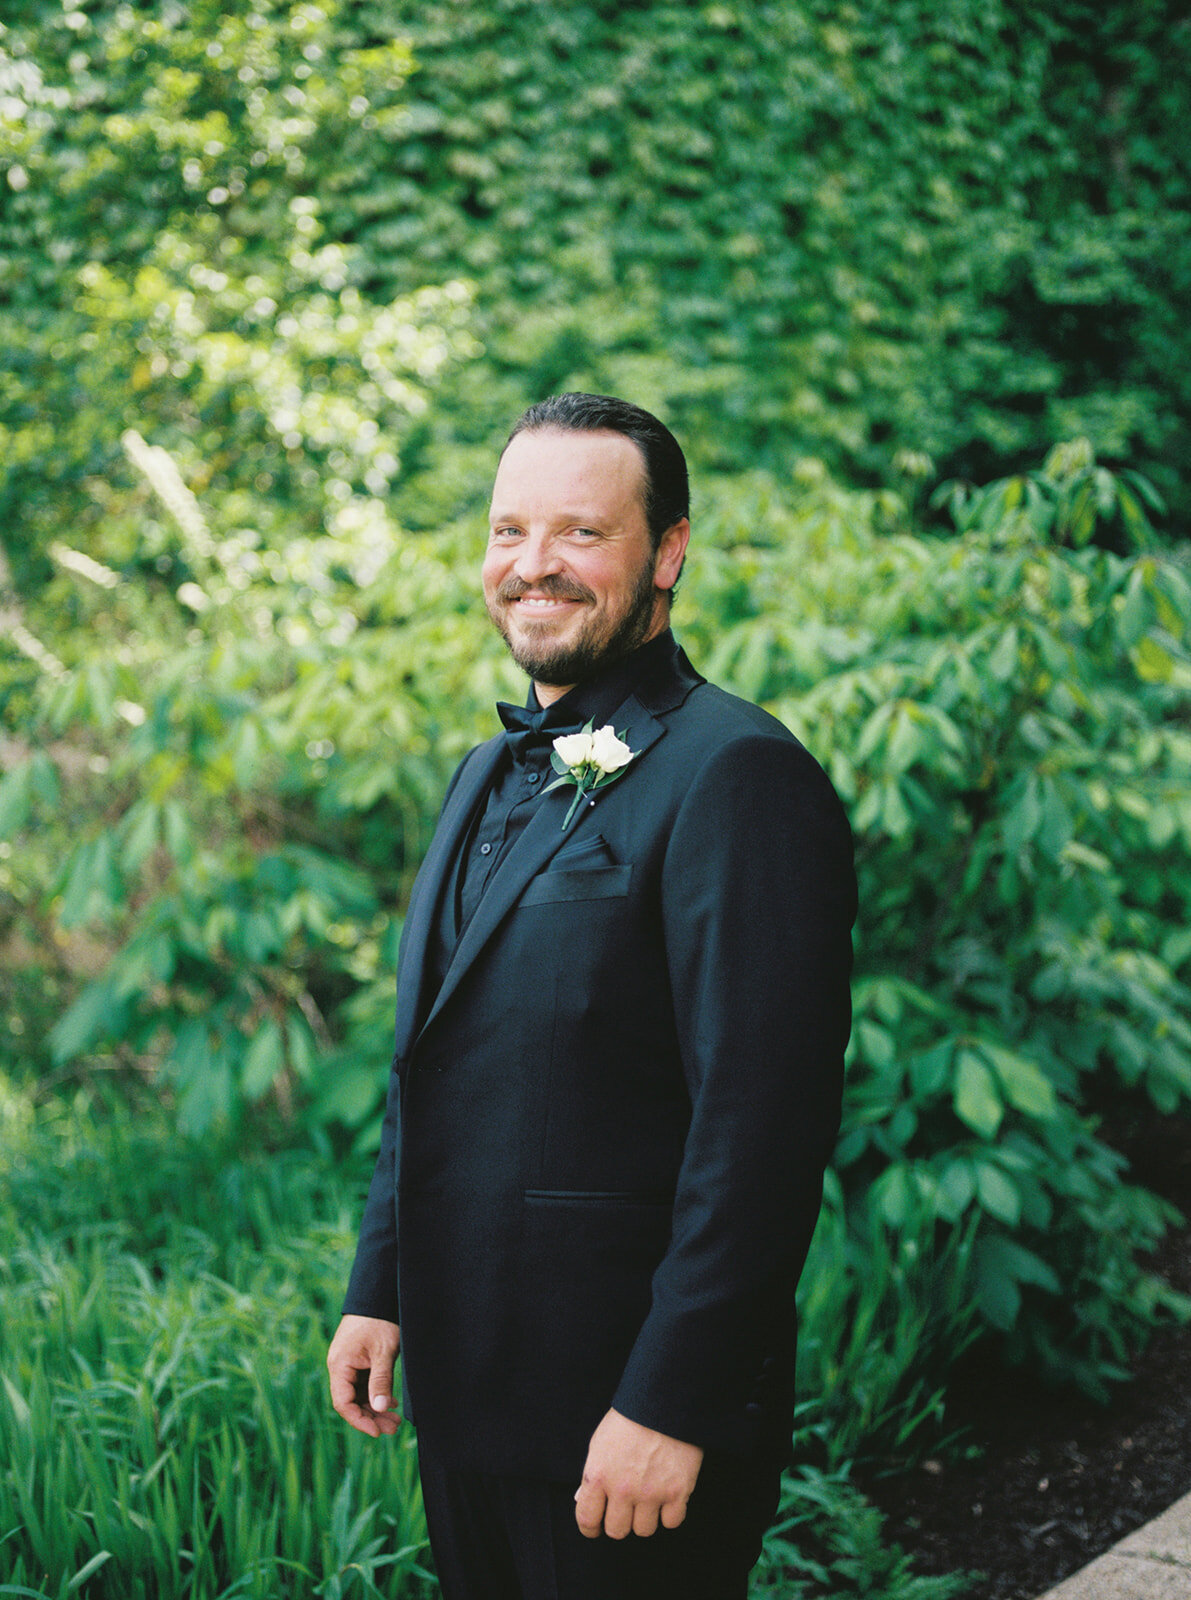 Groom dressed in all black smiles as he smiles towards the camera